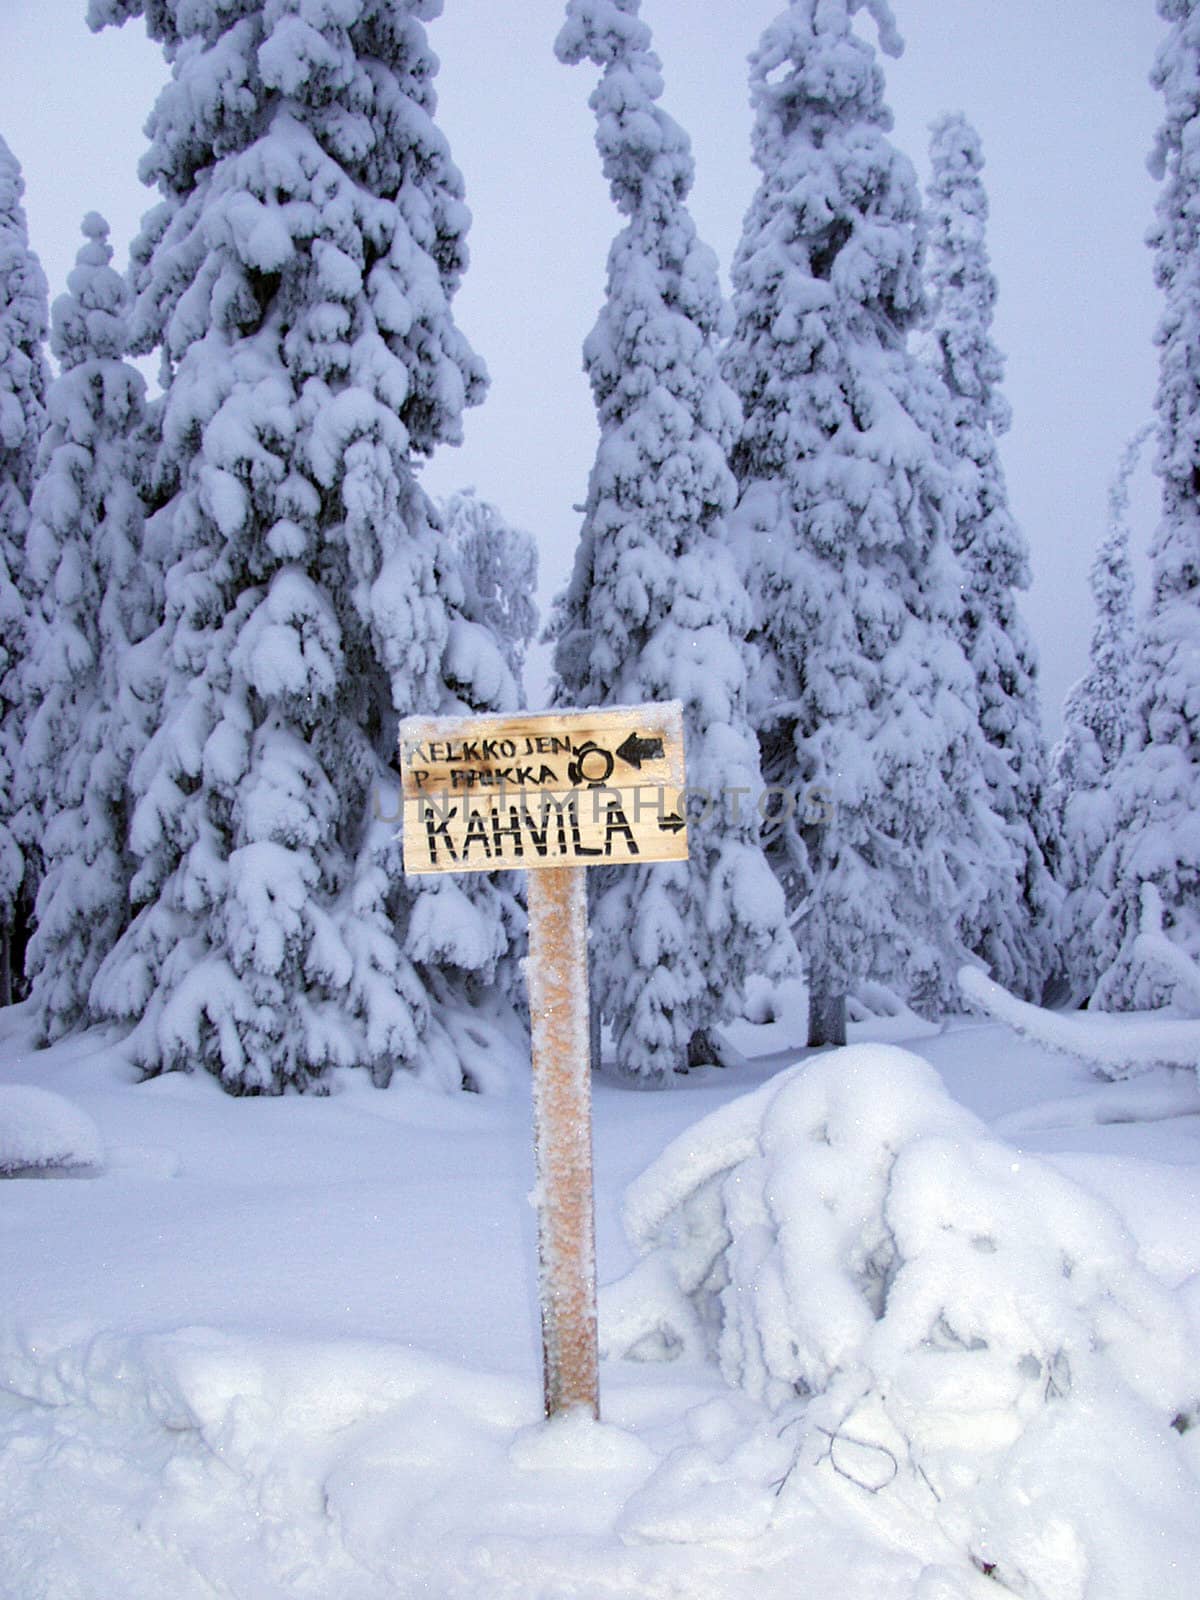 Signpost in the winter forest by NickNick